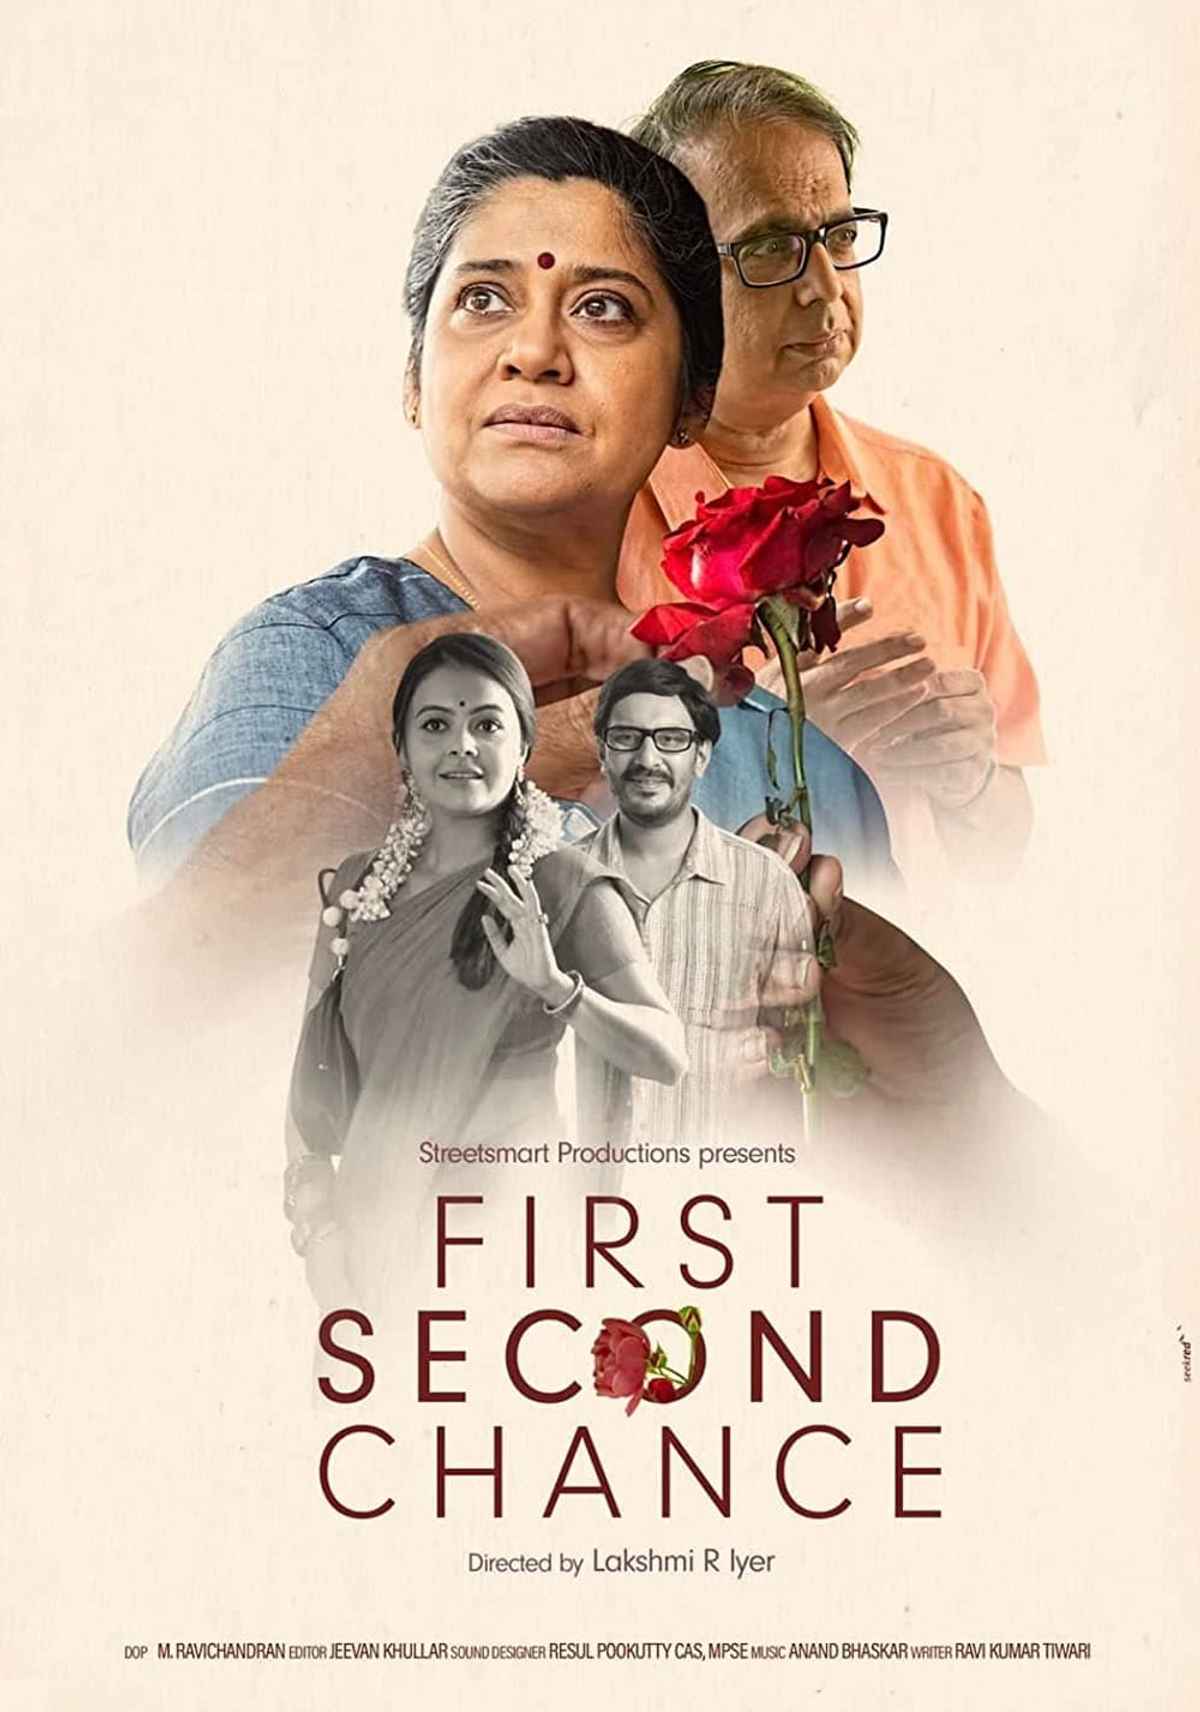 First Second Chance